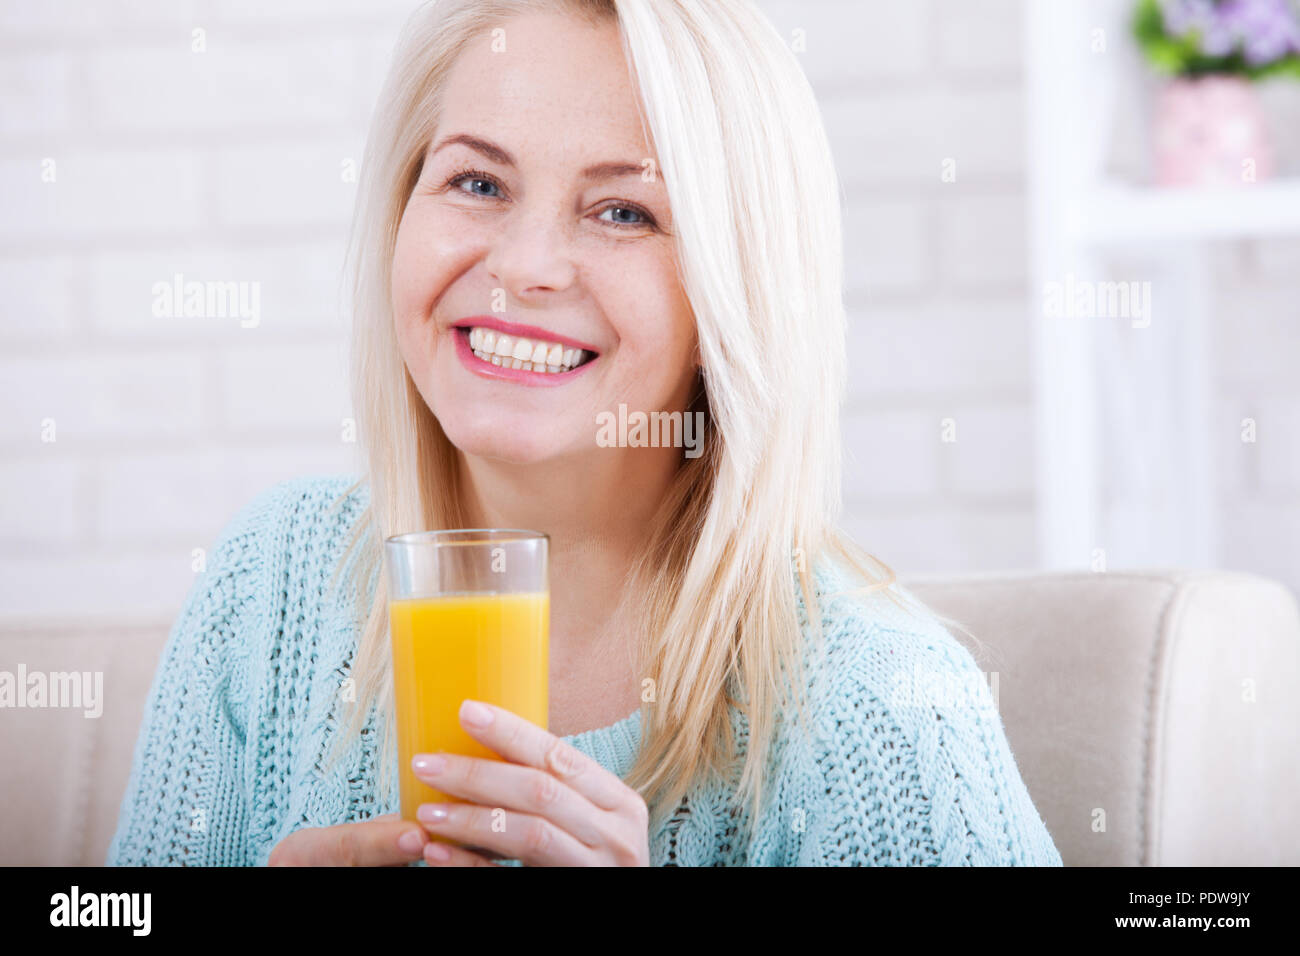 Woman drinking orange juice smiling. Beautiful middle aged Caucasian model at home. Stock Photo